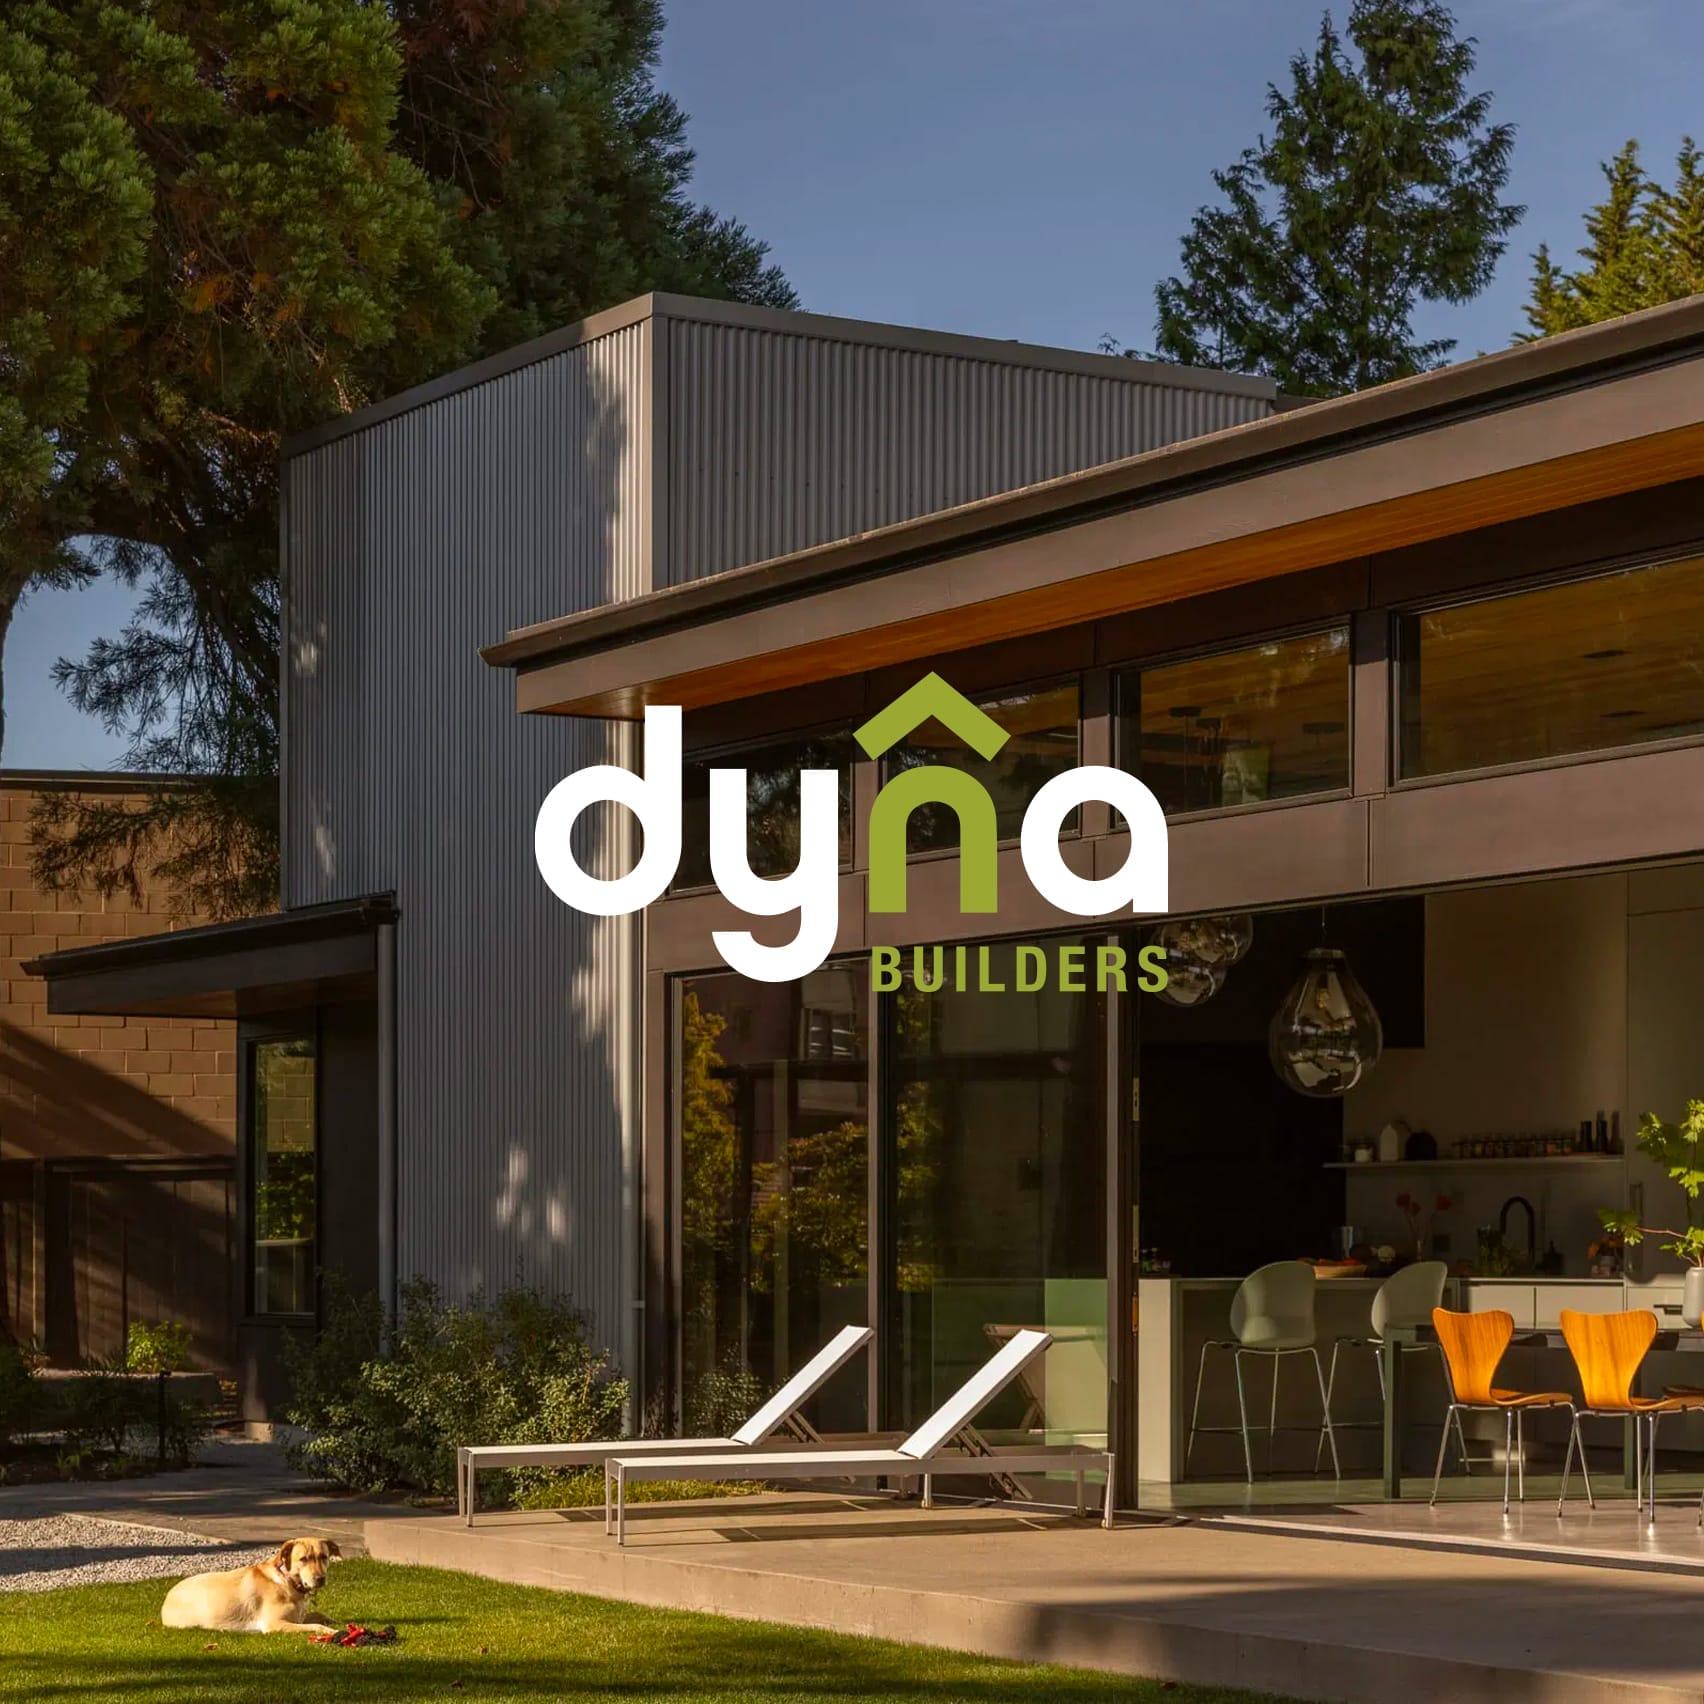 Dyna Builders logo in front of a house.